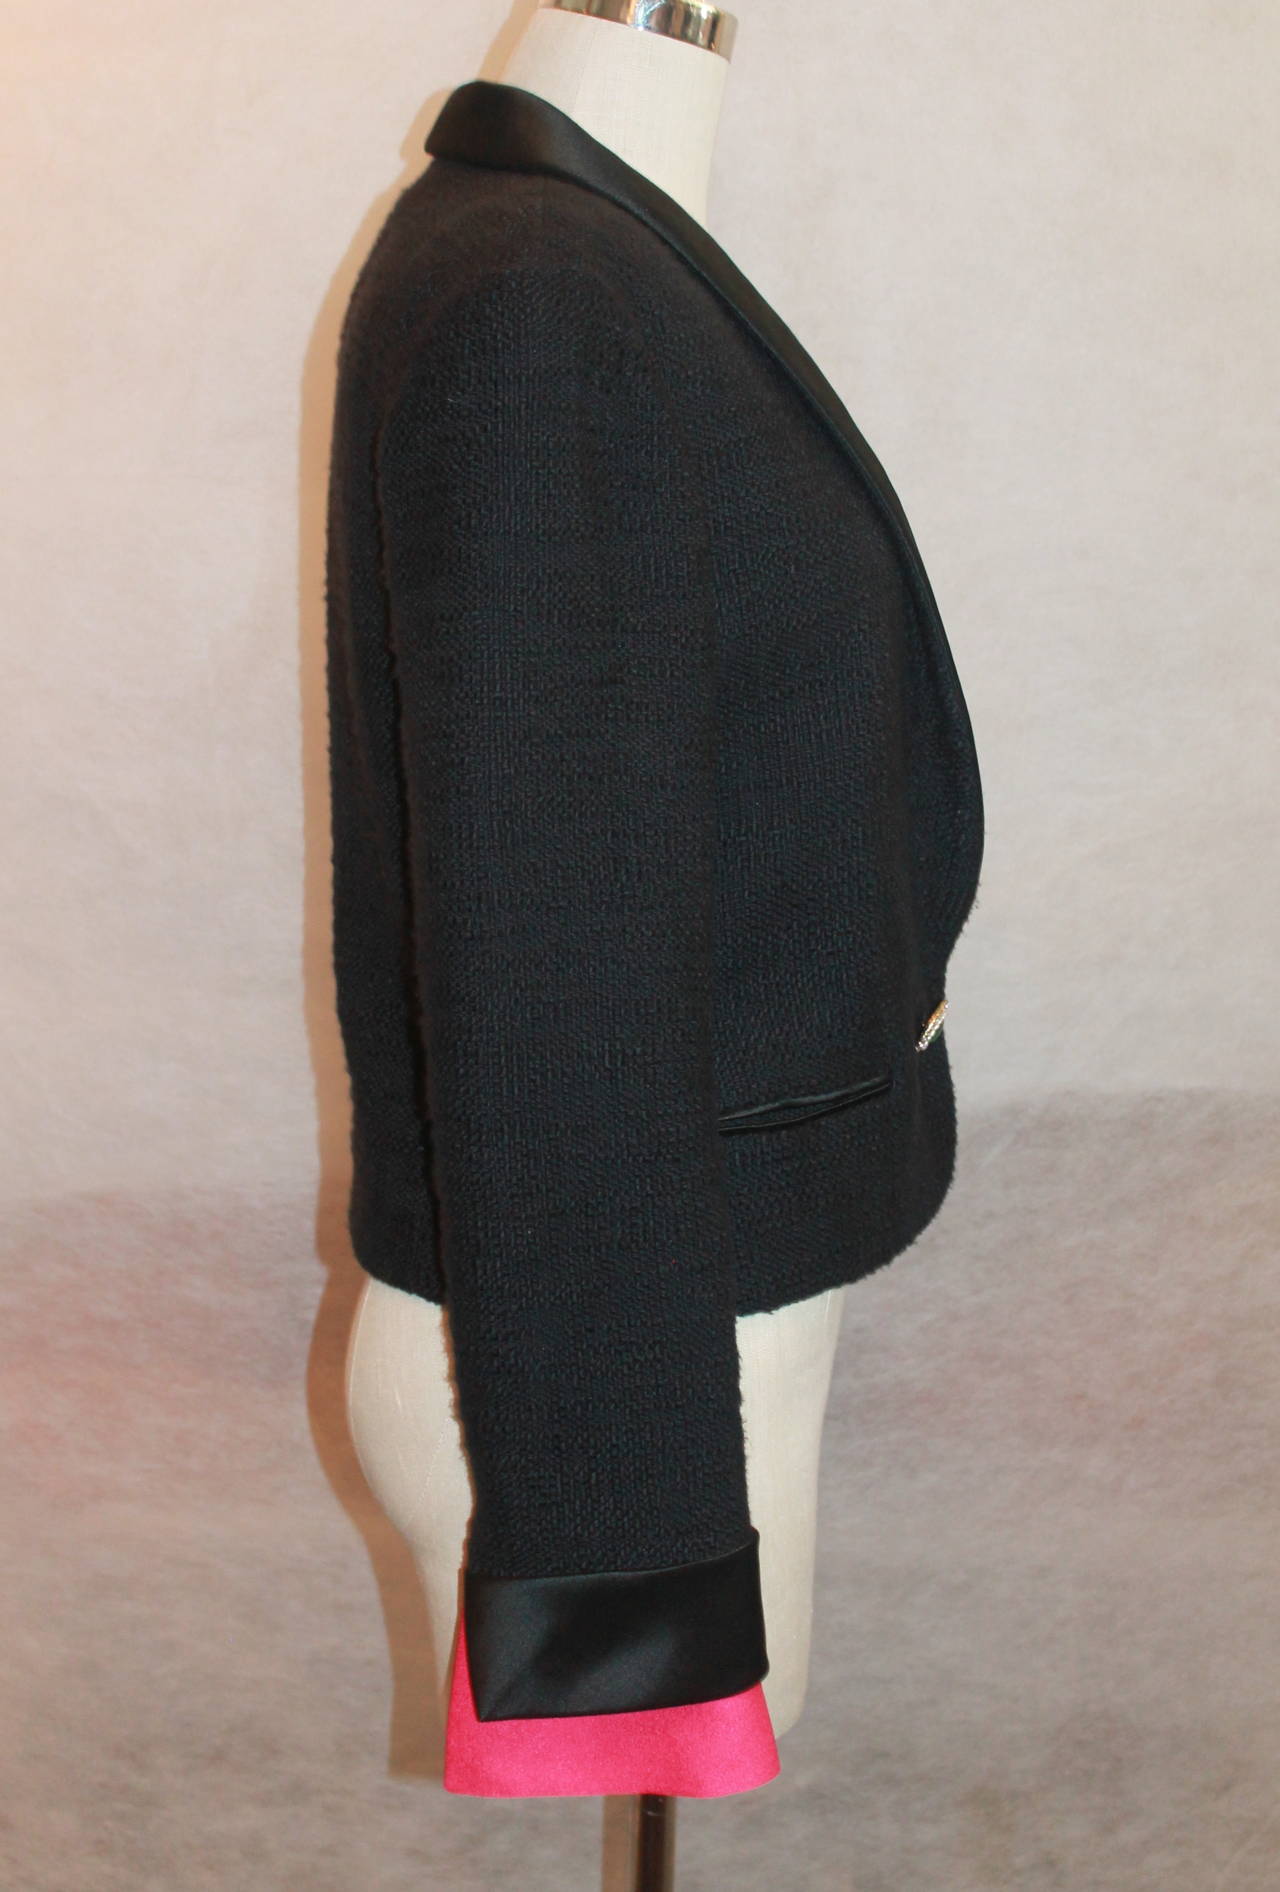 Chanel Black tuxedo style jacket w/ pink removable cuffs-40 In Excellent Condition In West Palm Beach, FL